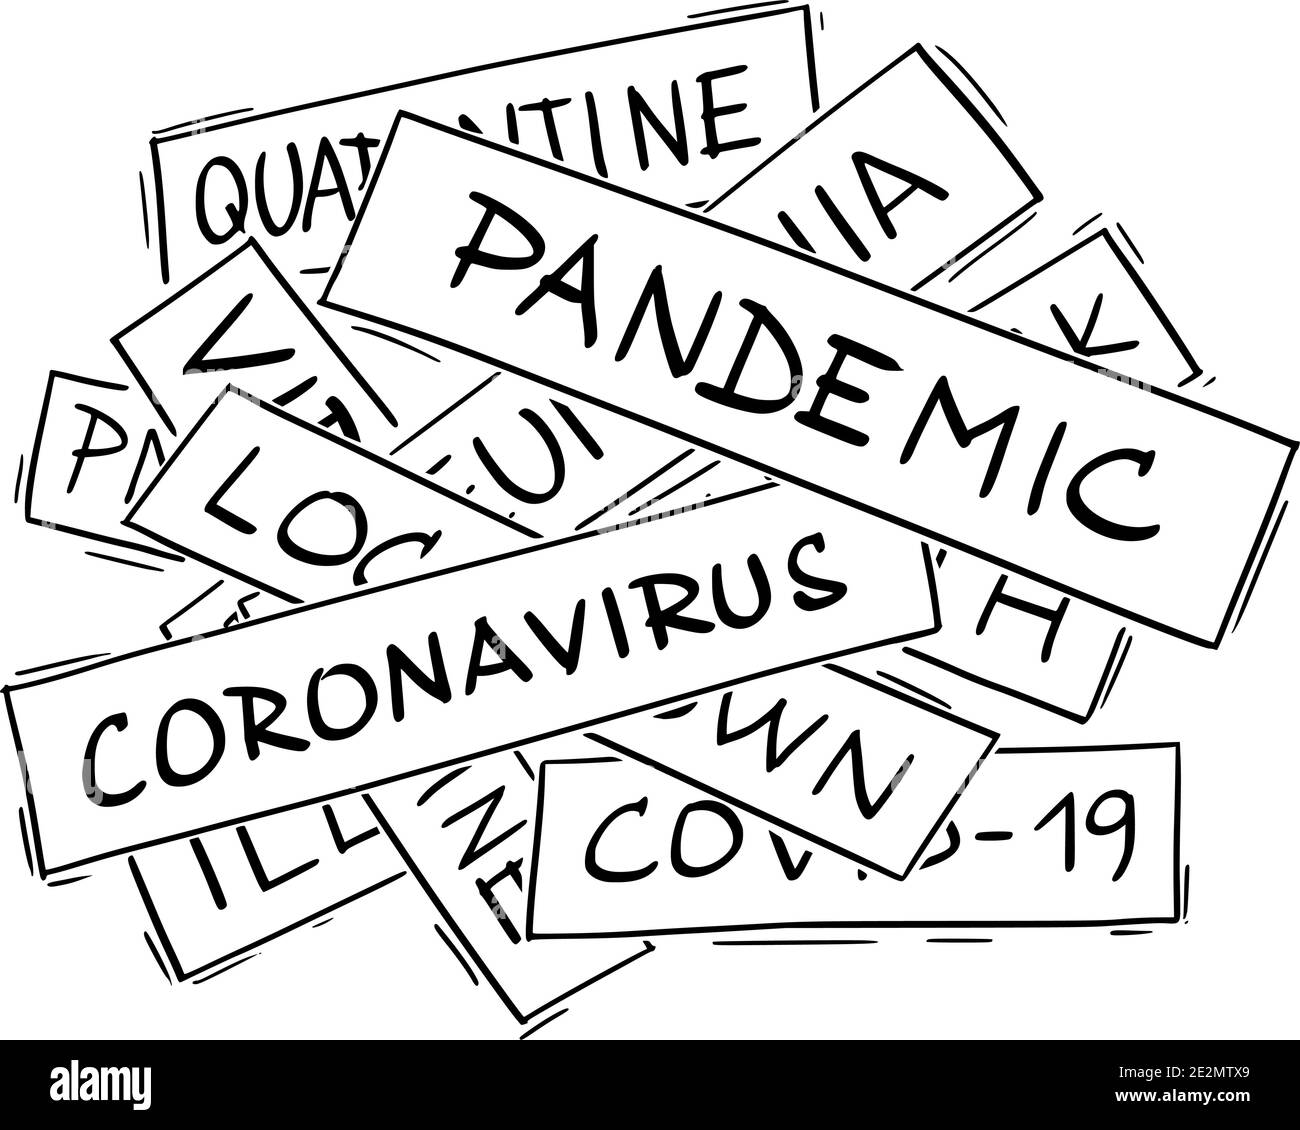 Vector illustration or drawing of covid-19 coronavirus epidemic theme collage. Stock Vector